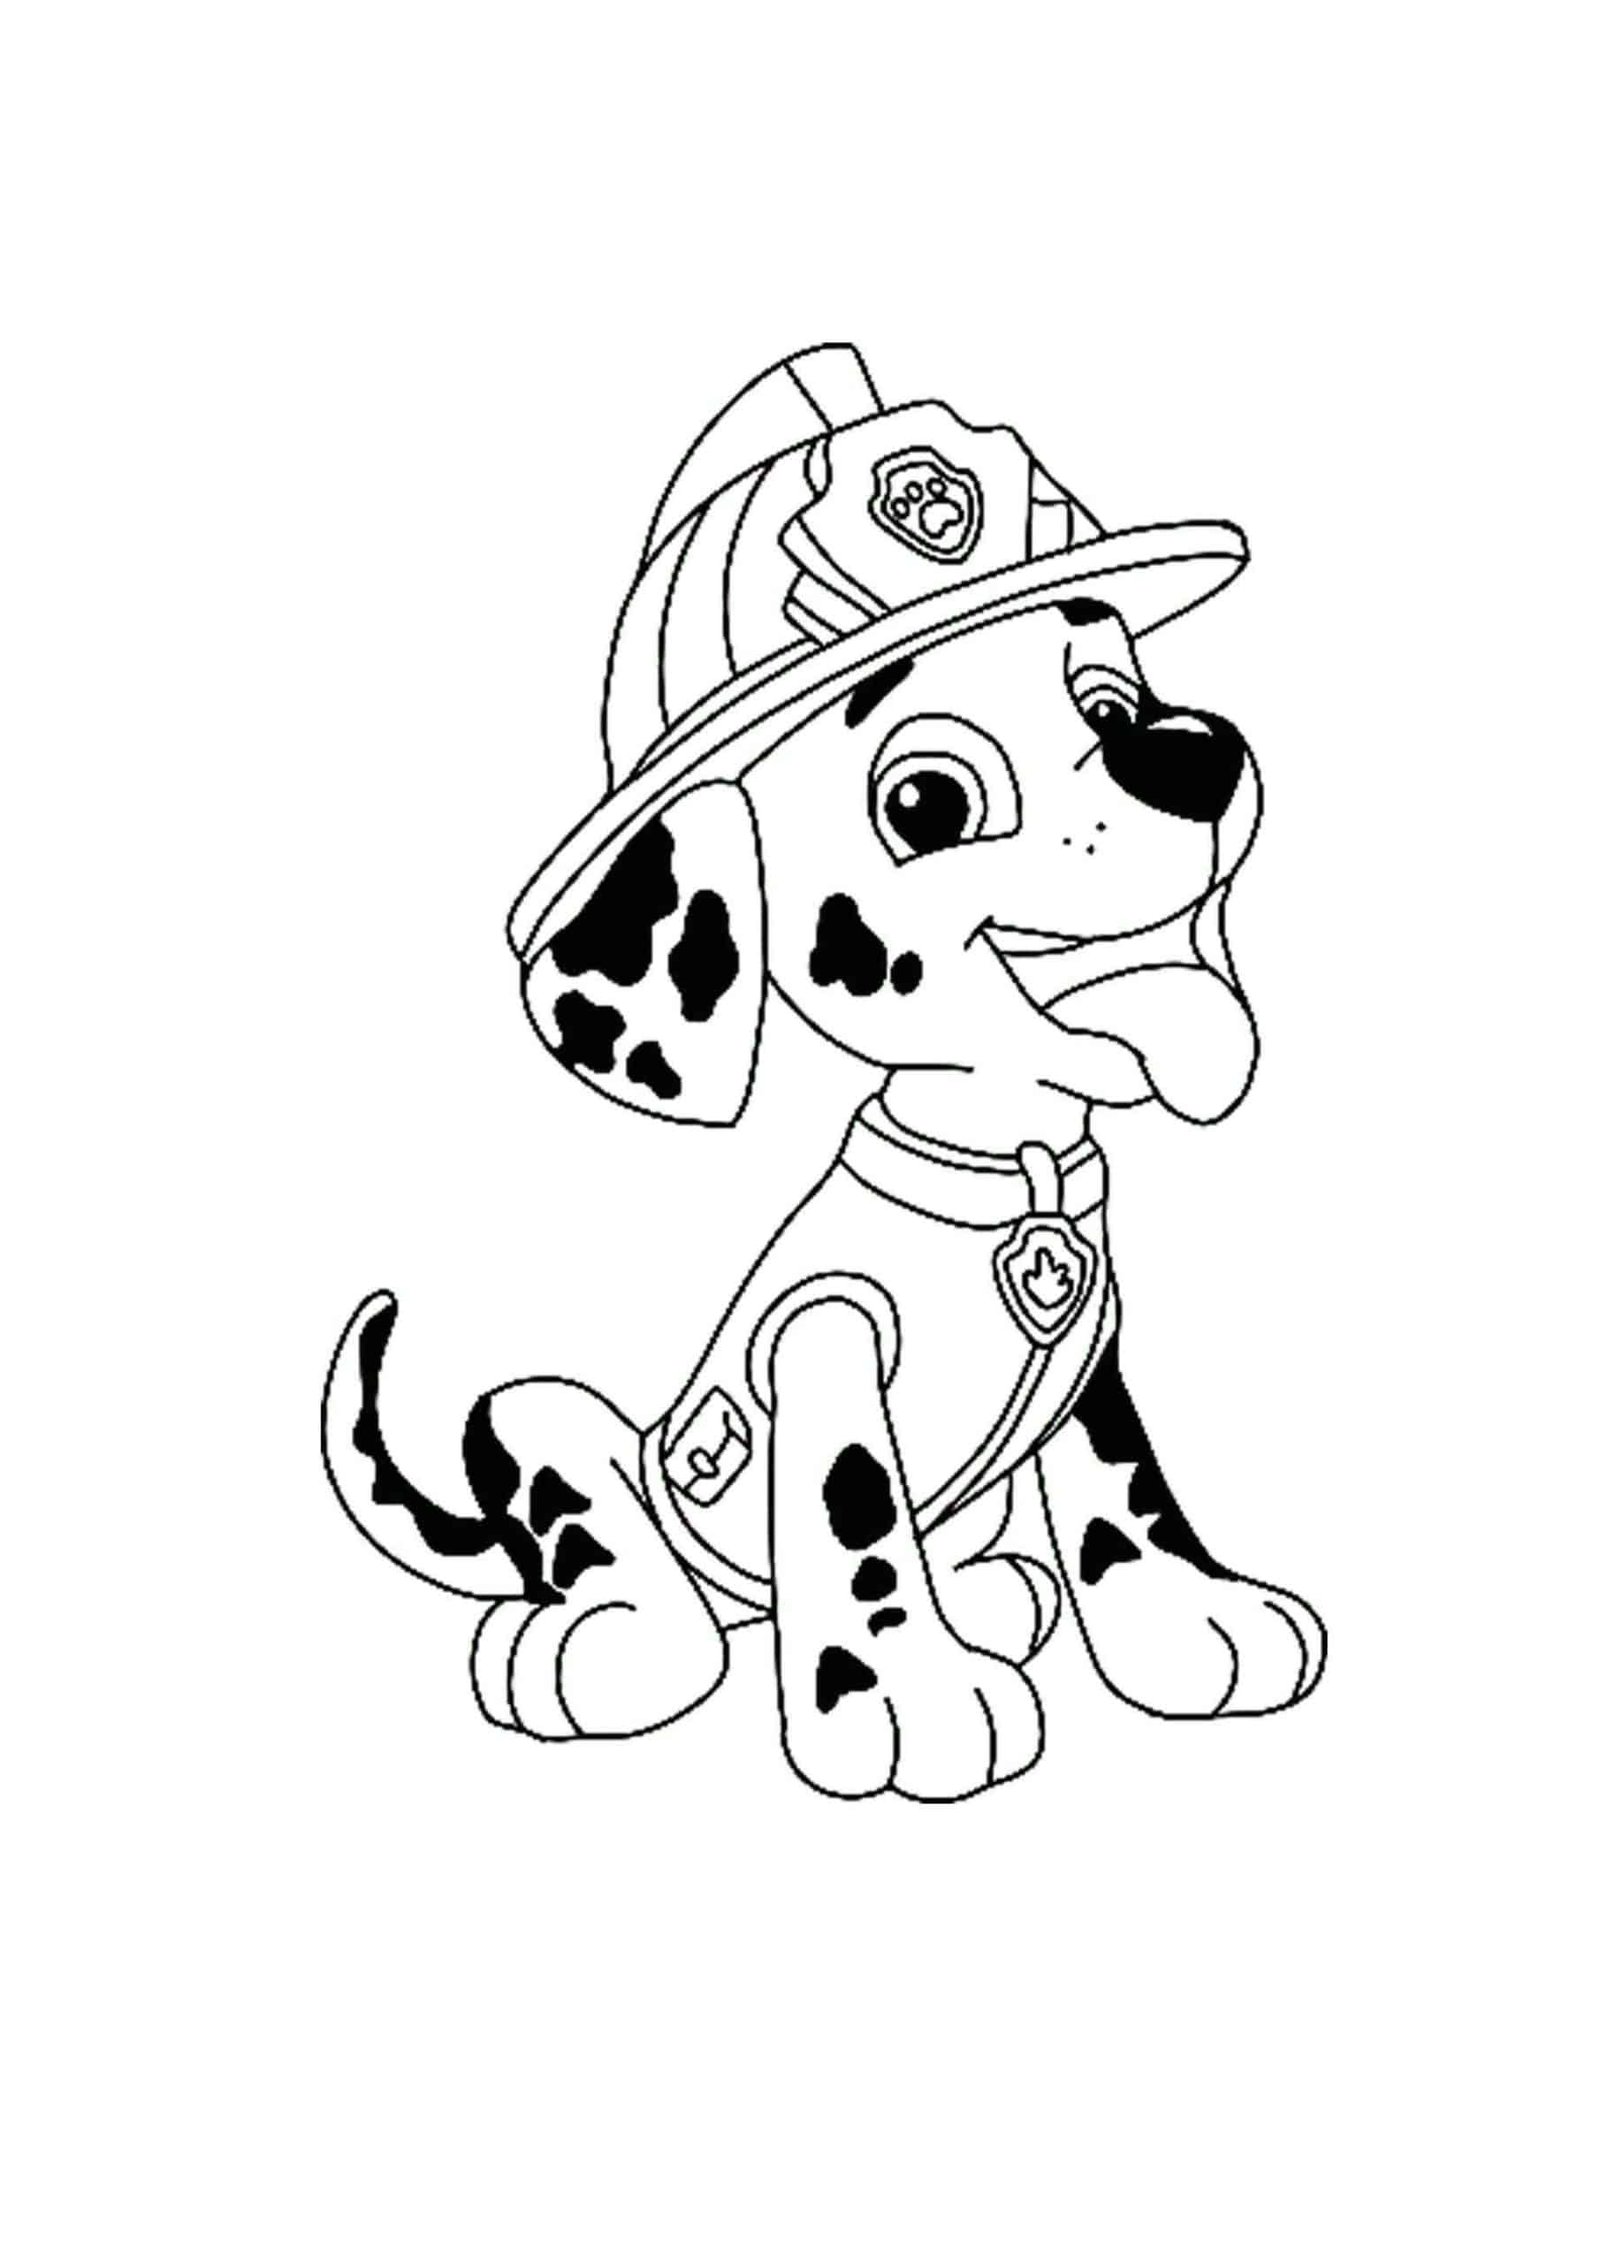 Paw patrol marshall coloring pages